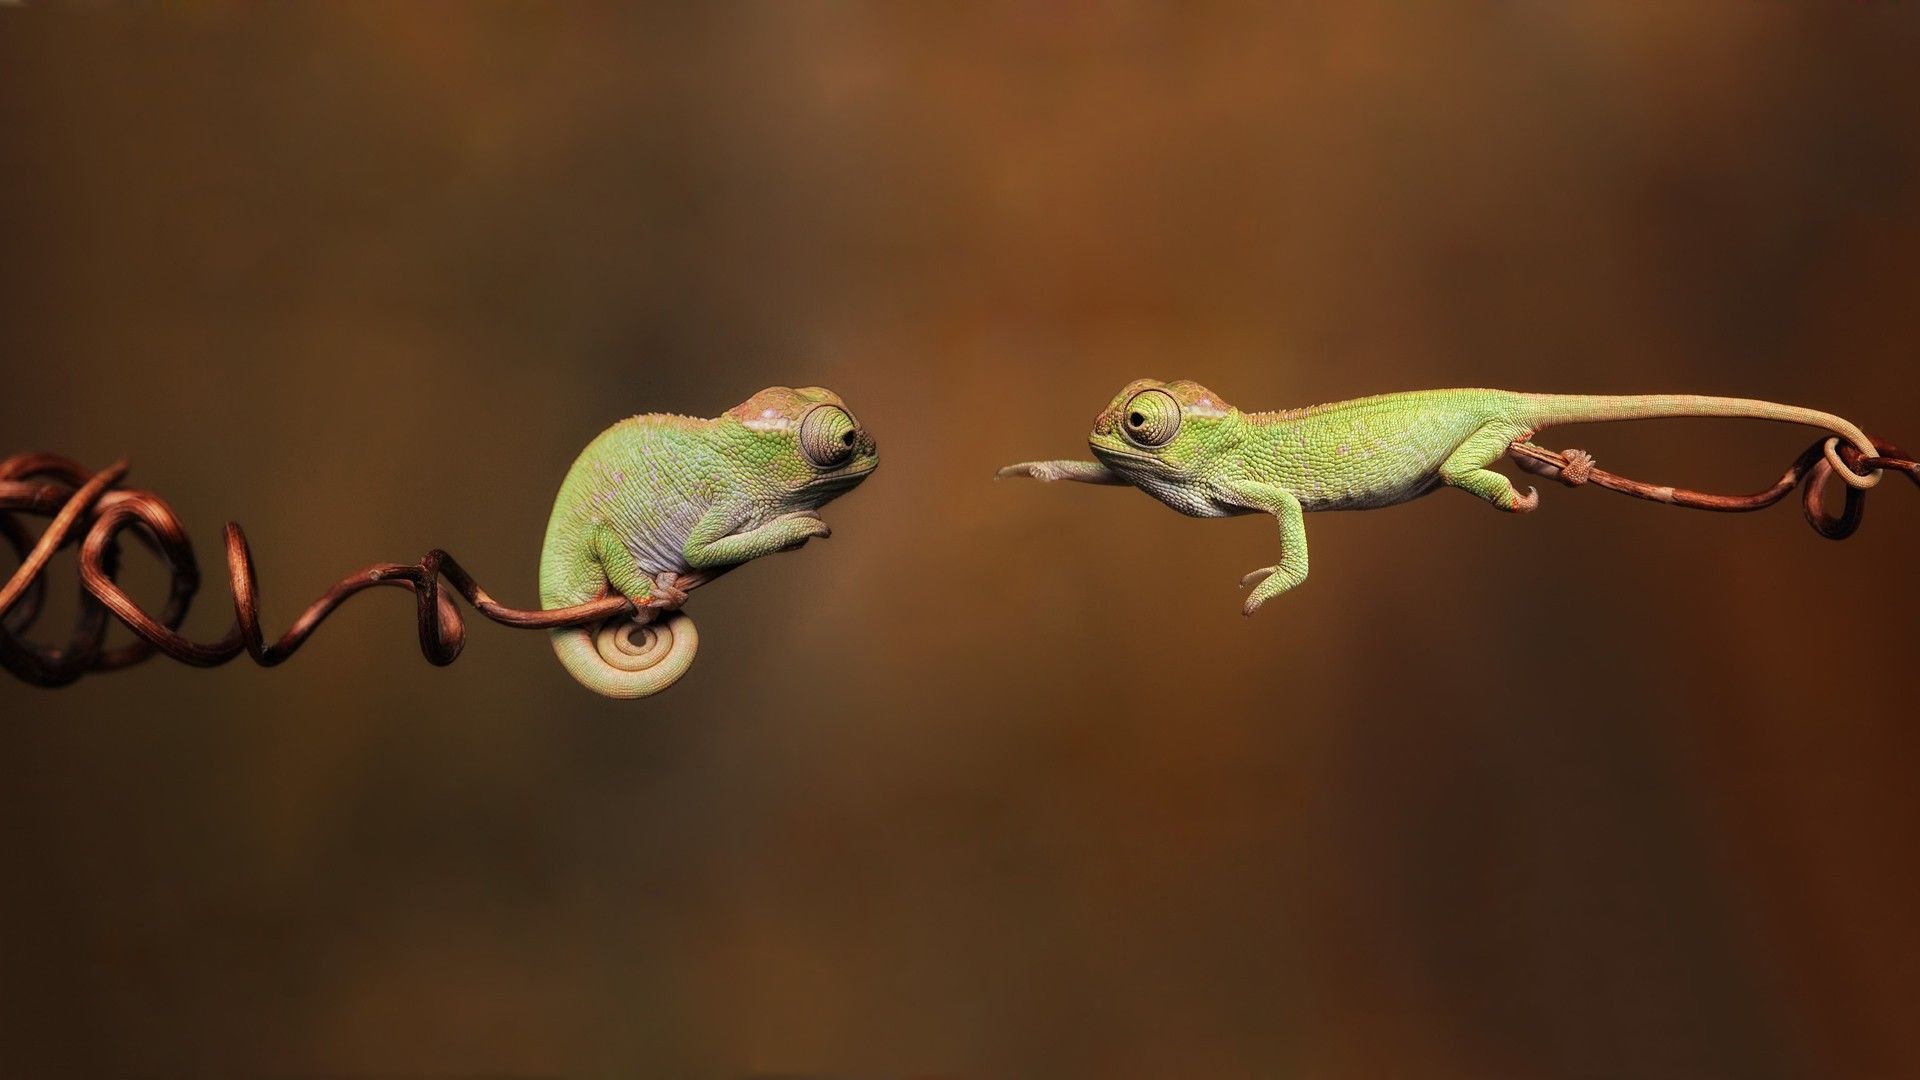 Wallpaper, animals, jumping, green, wildlife, blurred, hope, twigs, chameleons, gecko, lizard, fauna, 1920x1080 px, macro photography, scaled reptile, organism, chameleon, dactyloidae, iguania 1920x1080